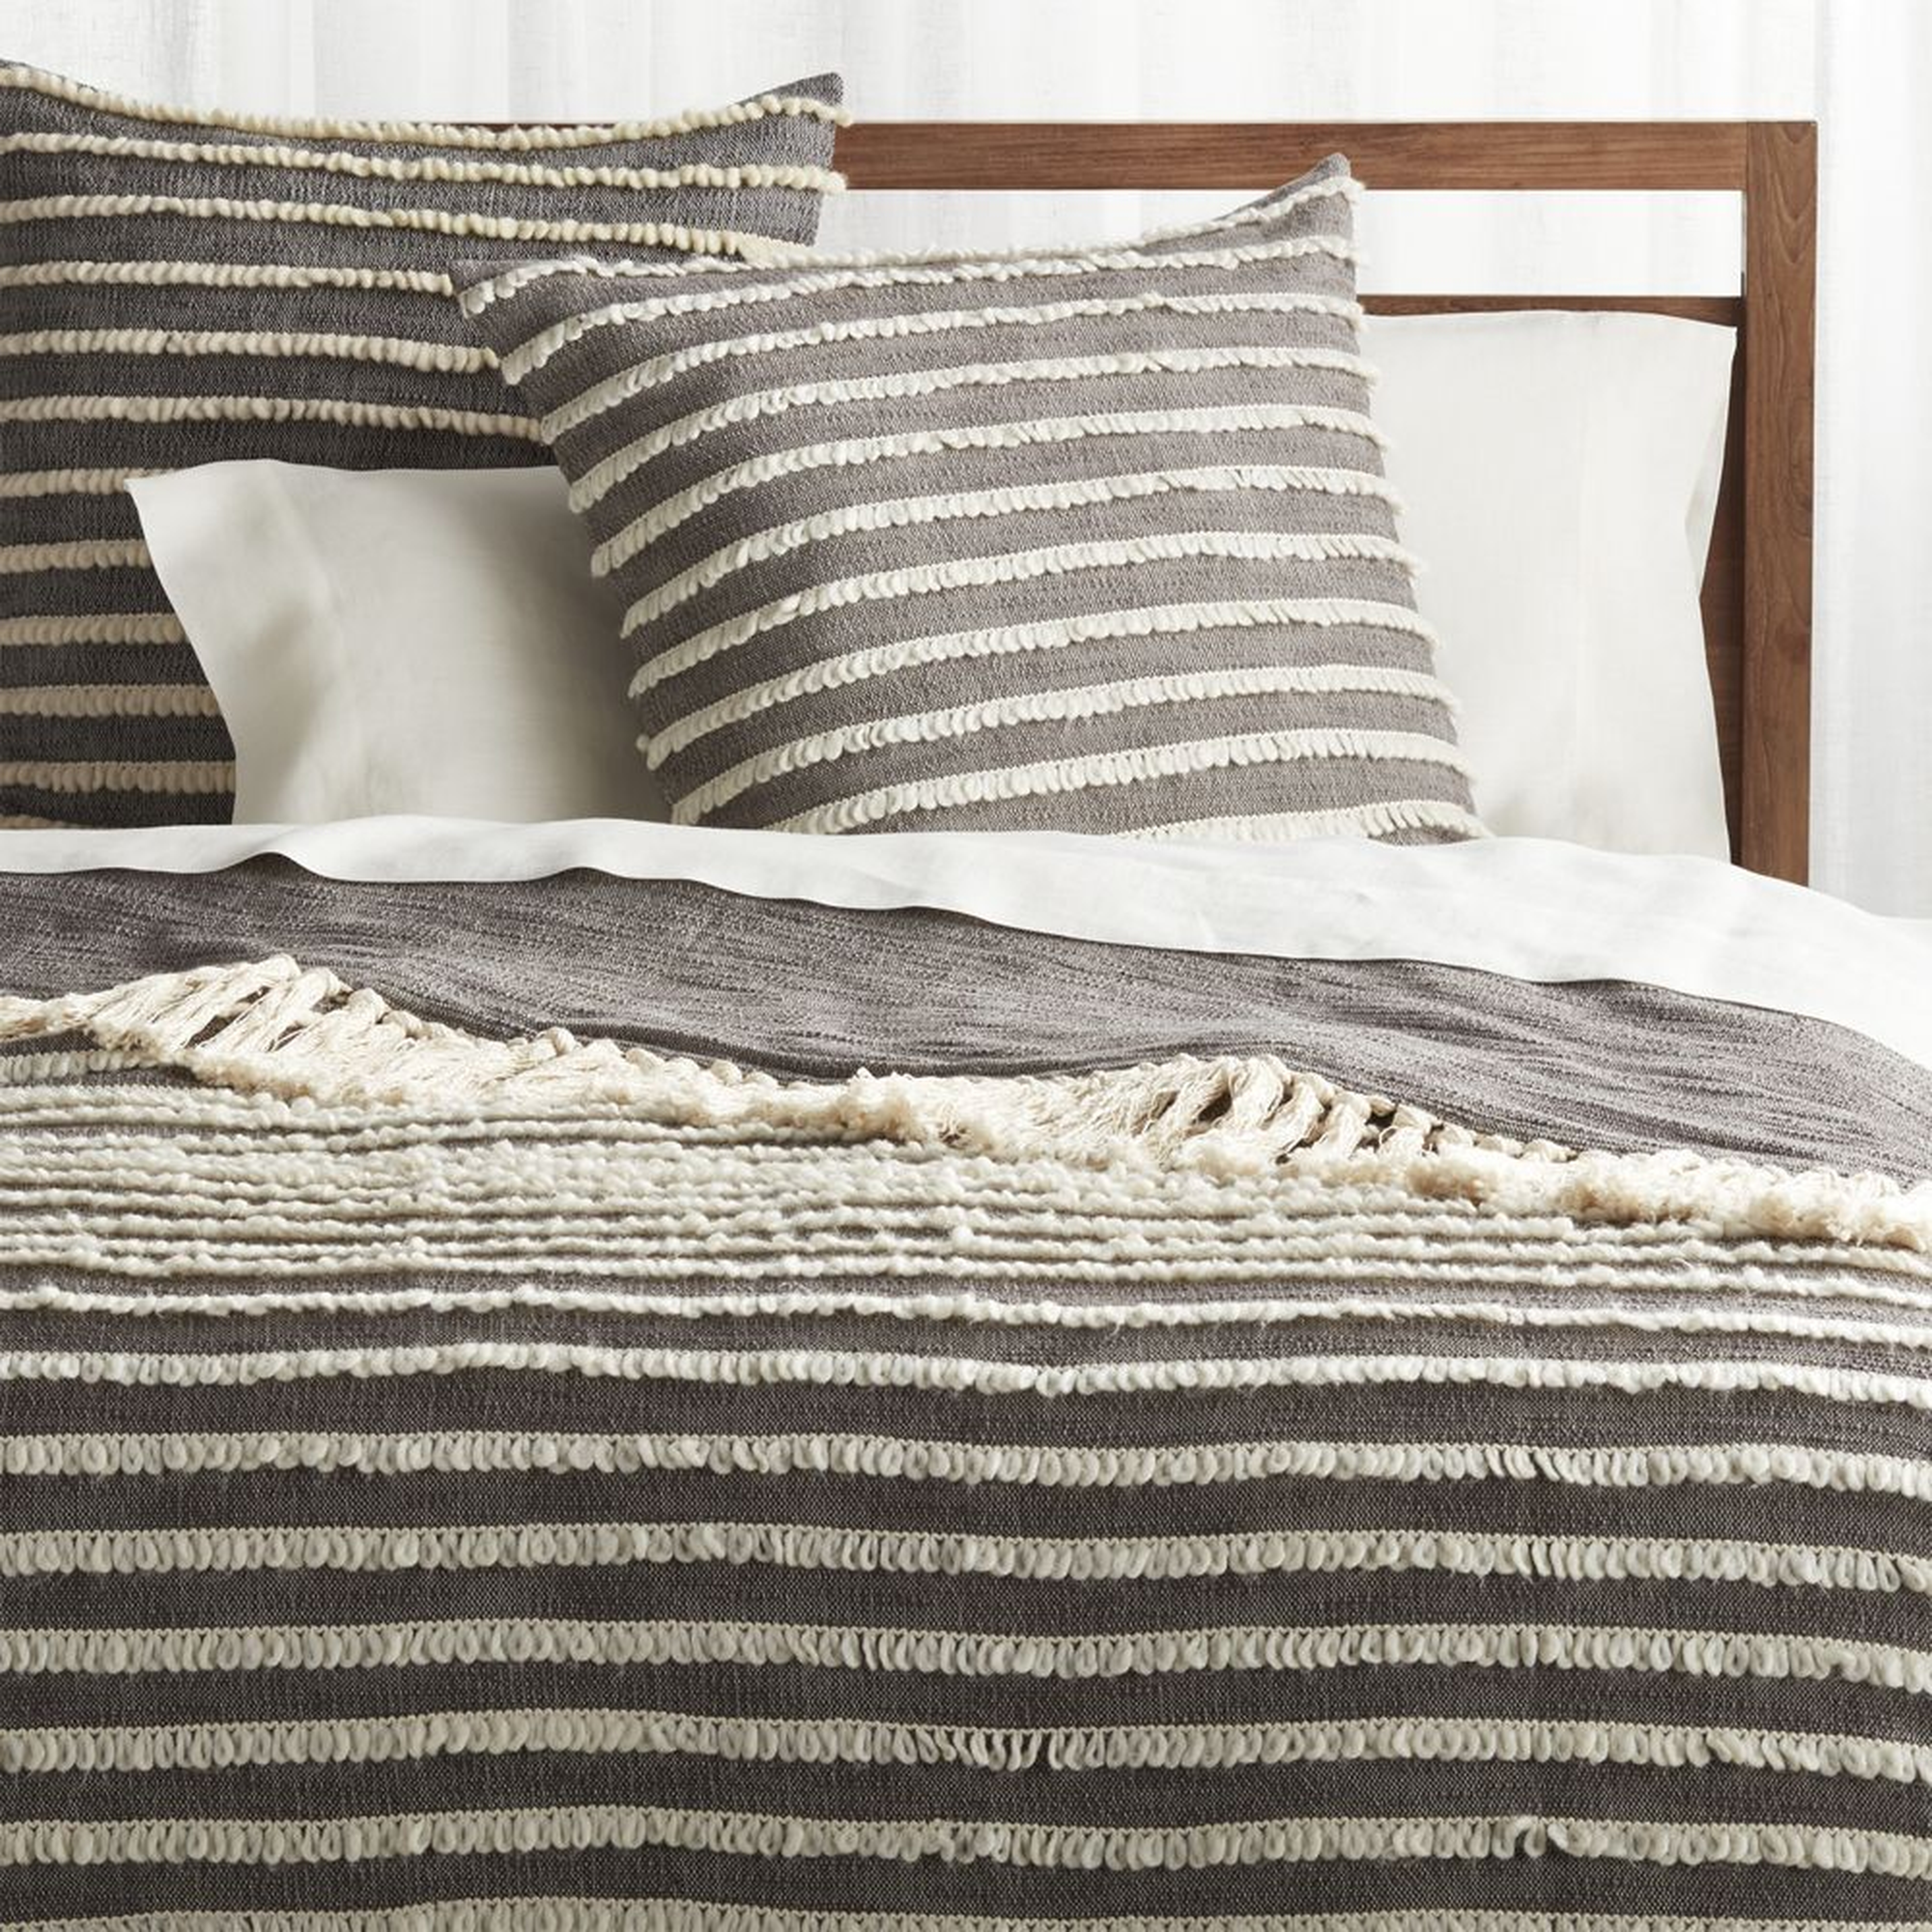 Corlett Grey and White Blanket - Crate and Barrel